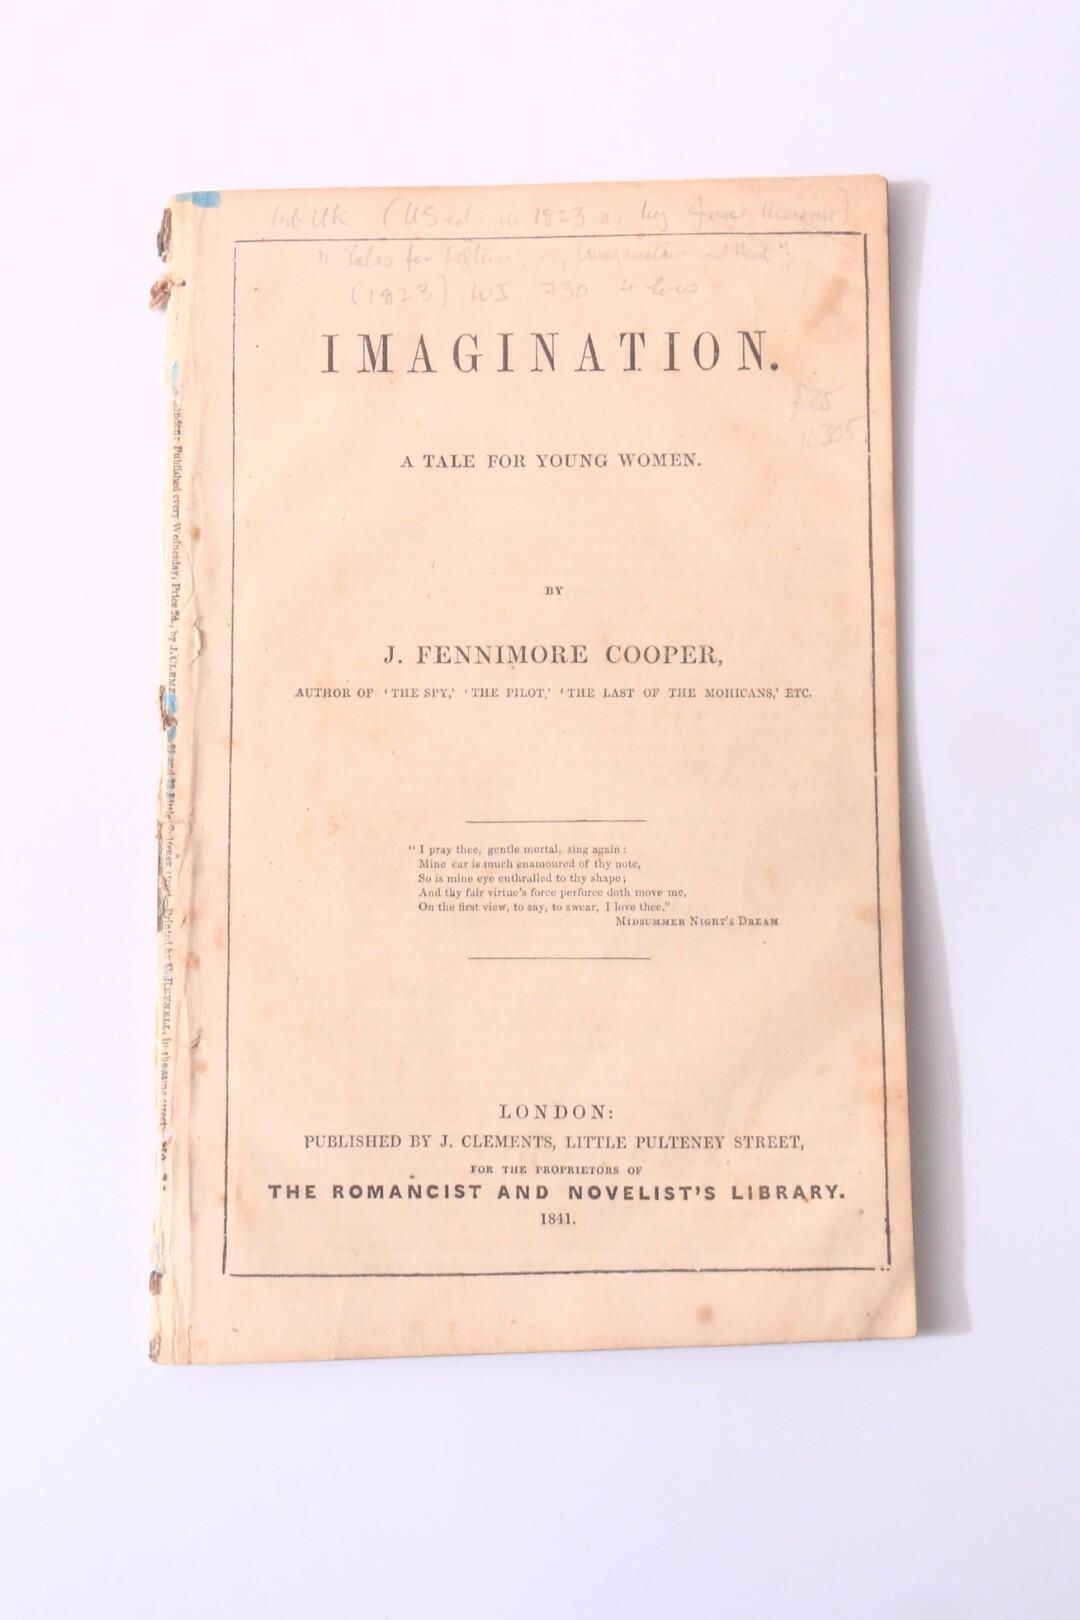 J. Fennimore Cooper - Imagination: A Tale for Young Women - J. Clements, 1841, First Edition.